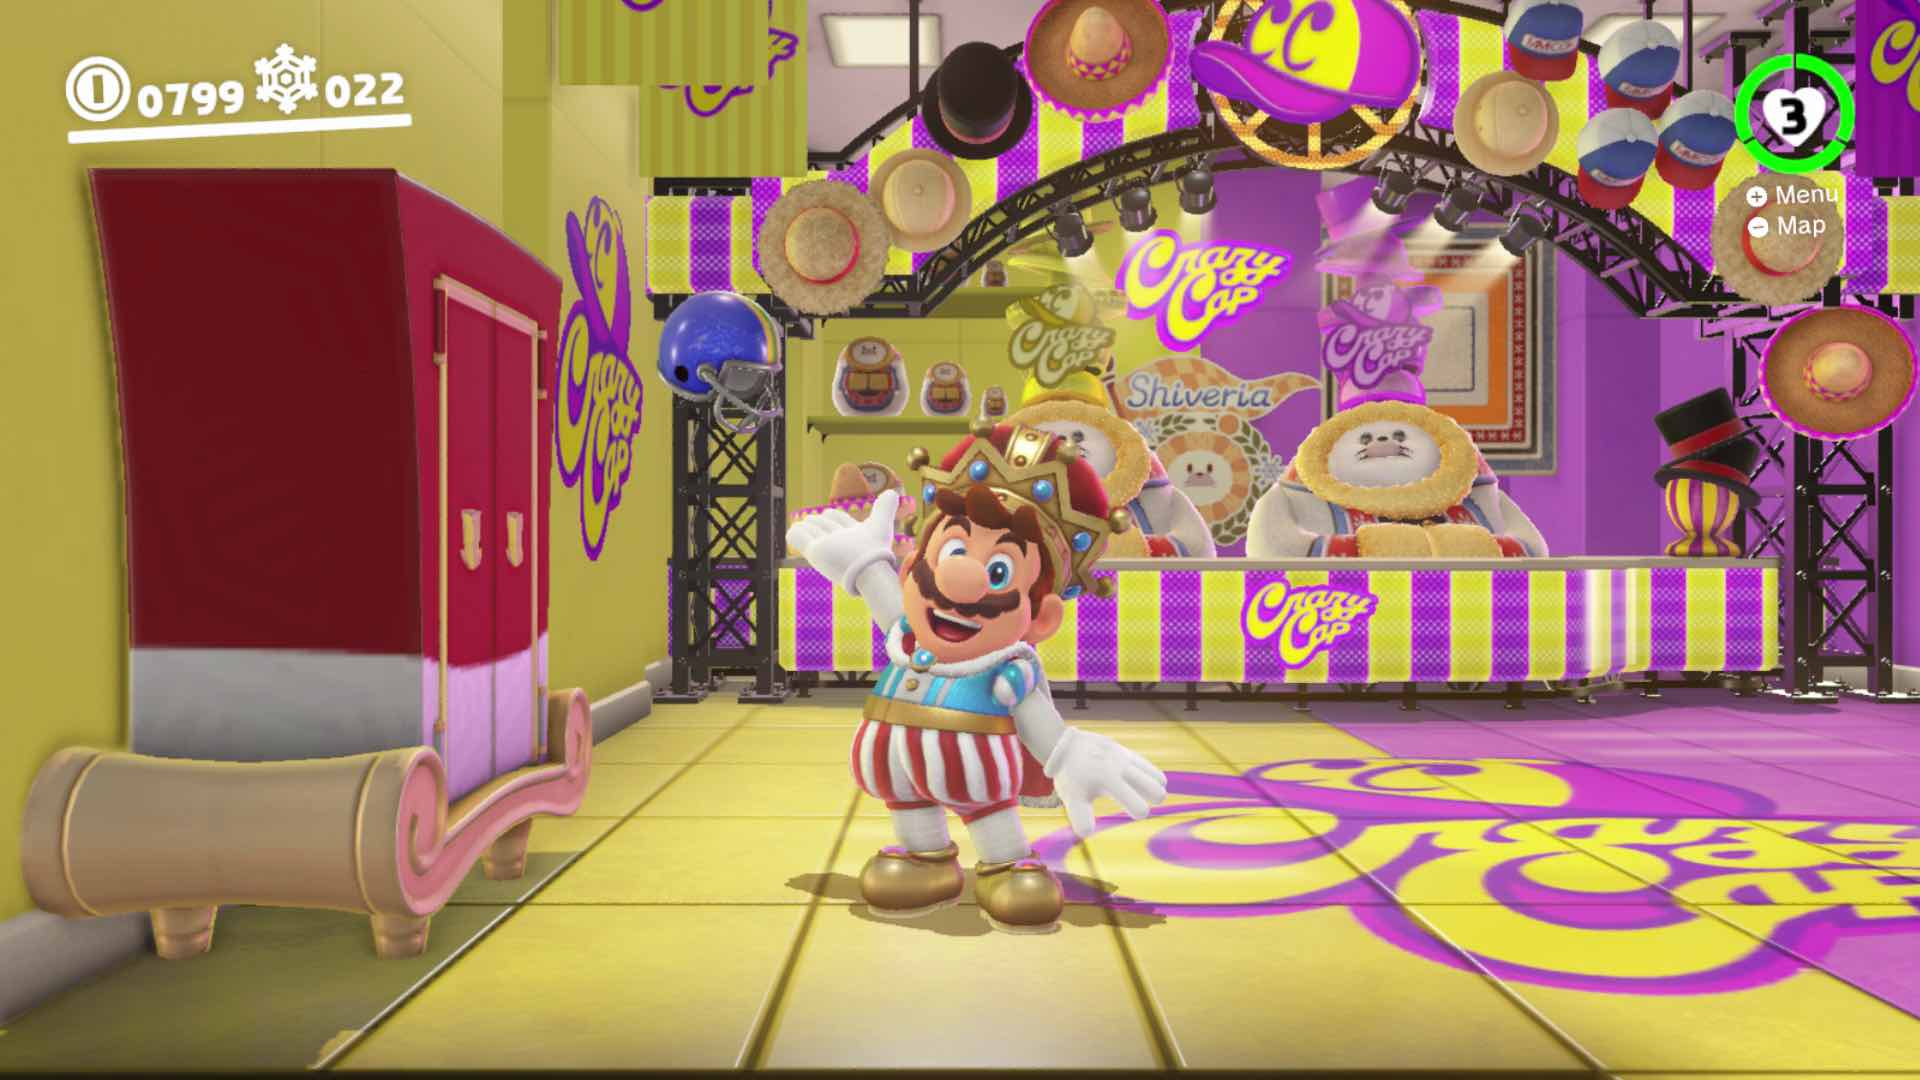 kings-outfit-super-mario-odyssey-screenshot